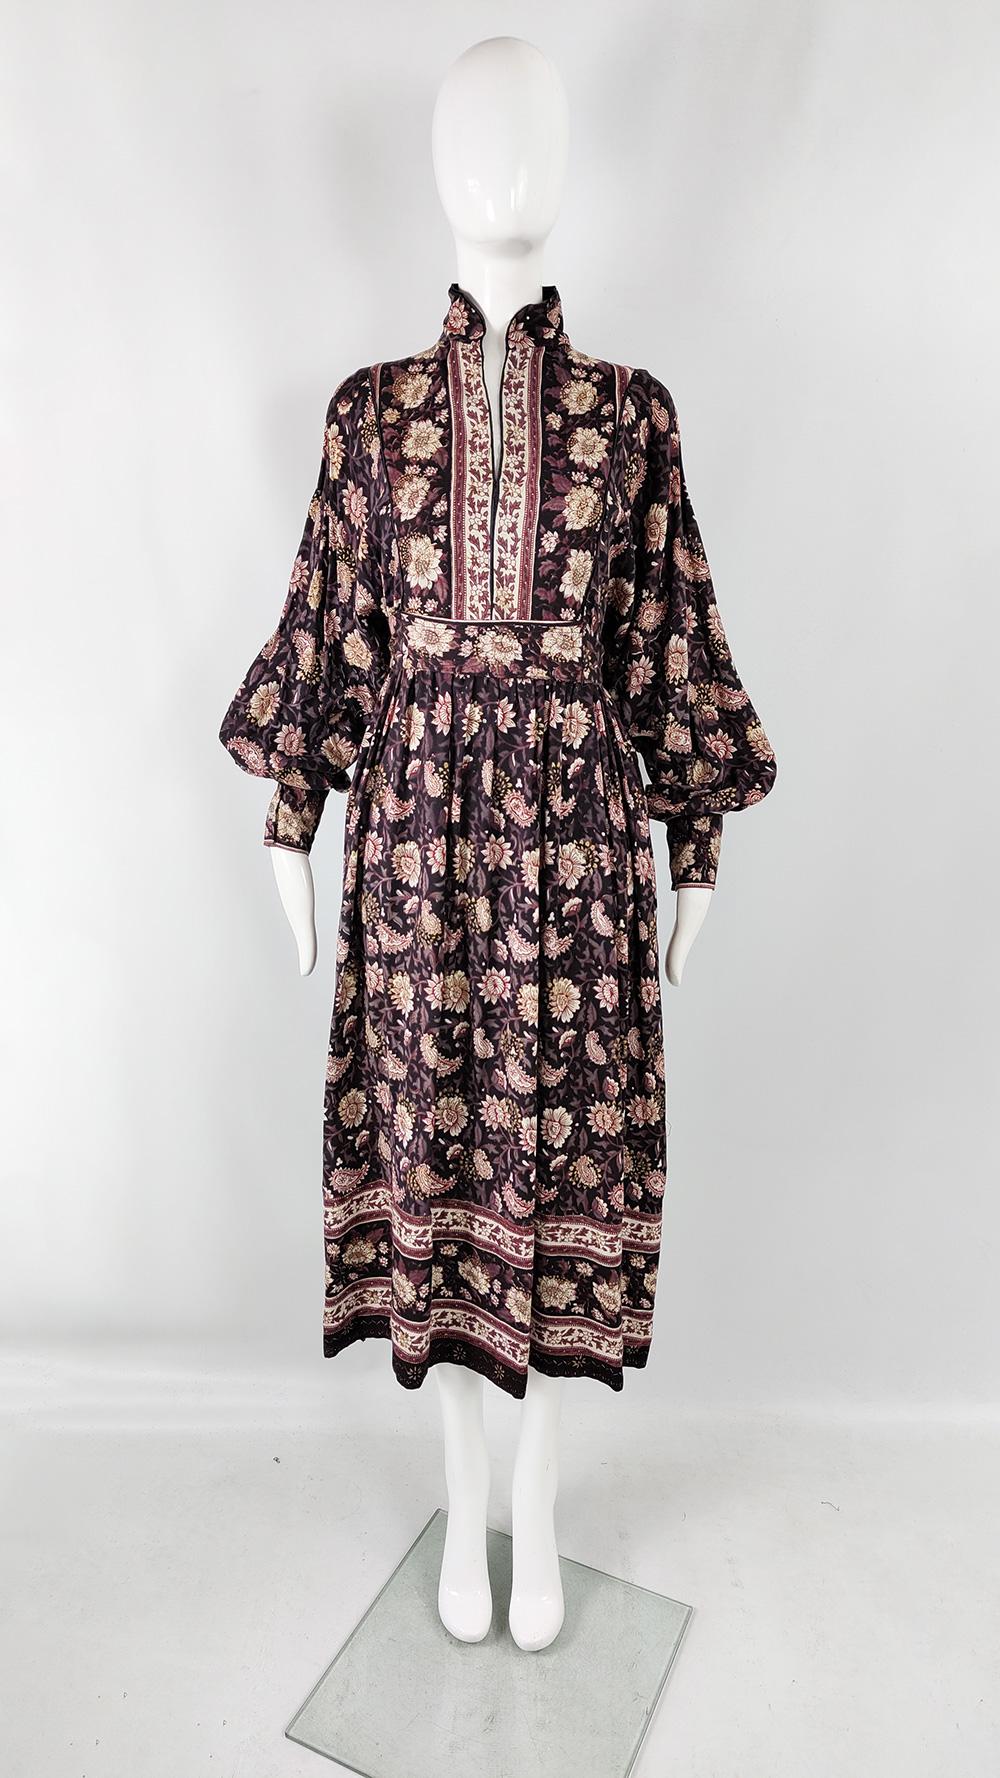 An incredible vintage womens dress from the 70s by luxury British-Indian fashion designer, Ayesha Davar. In a soft and drapey rayon fabric with an Indian block print throughout and subtle gold painted details adding a luxe touch. It has voluminous